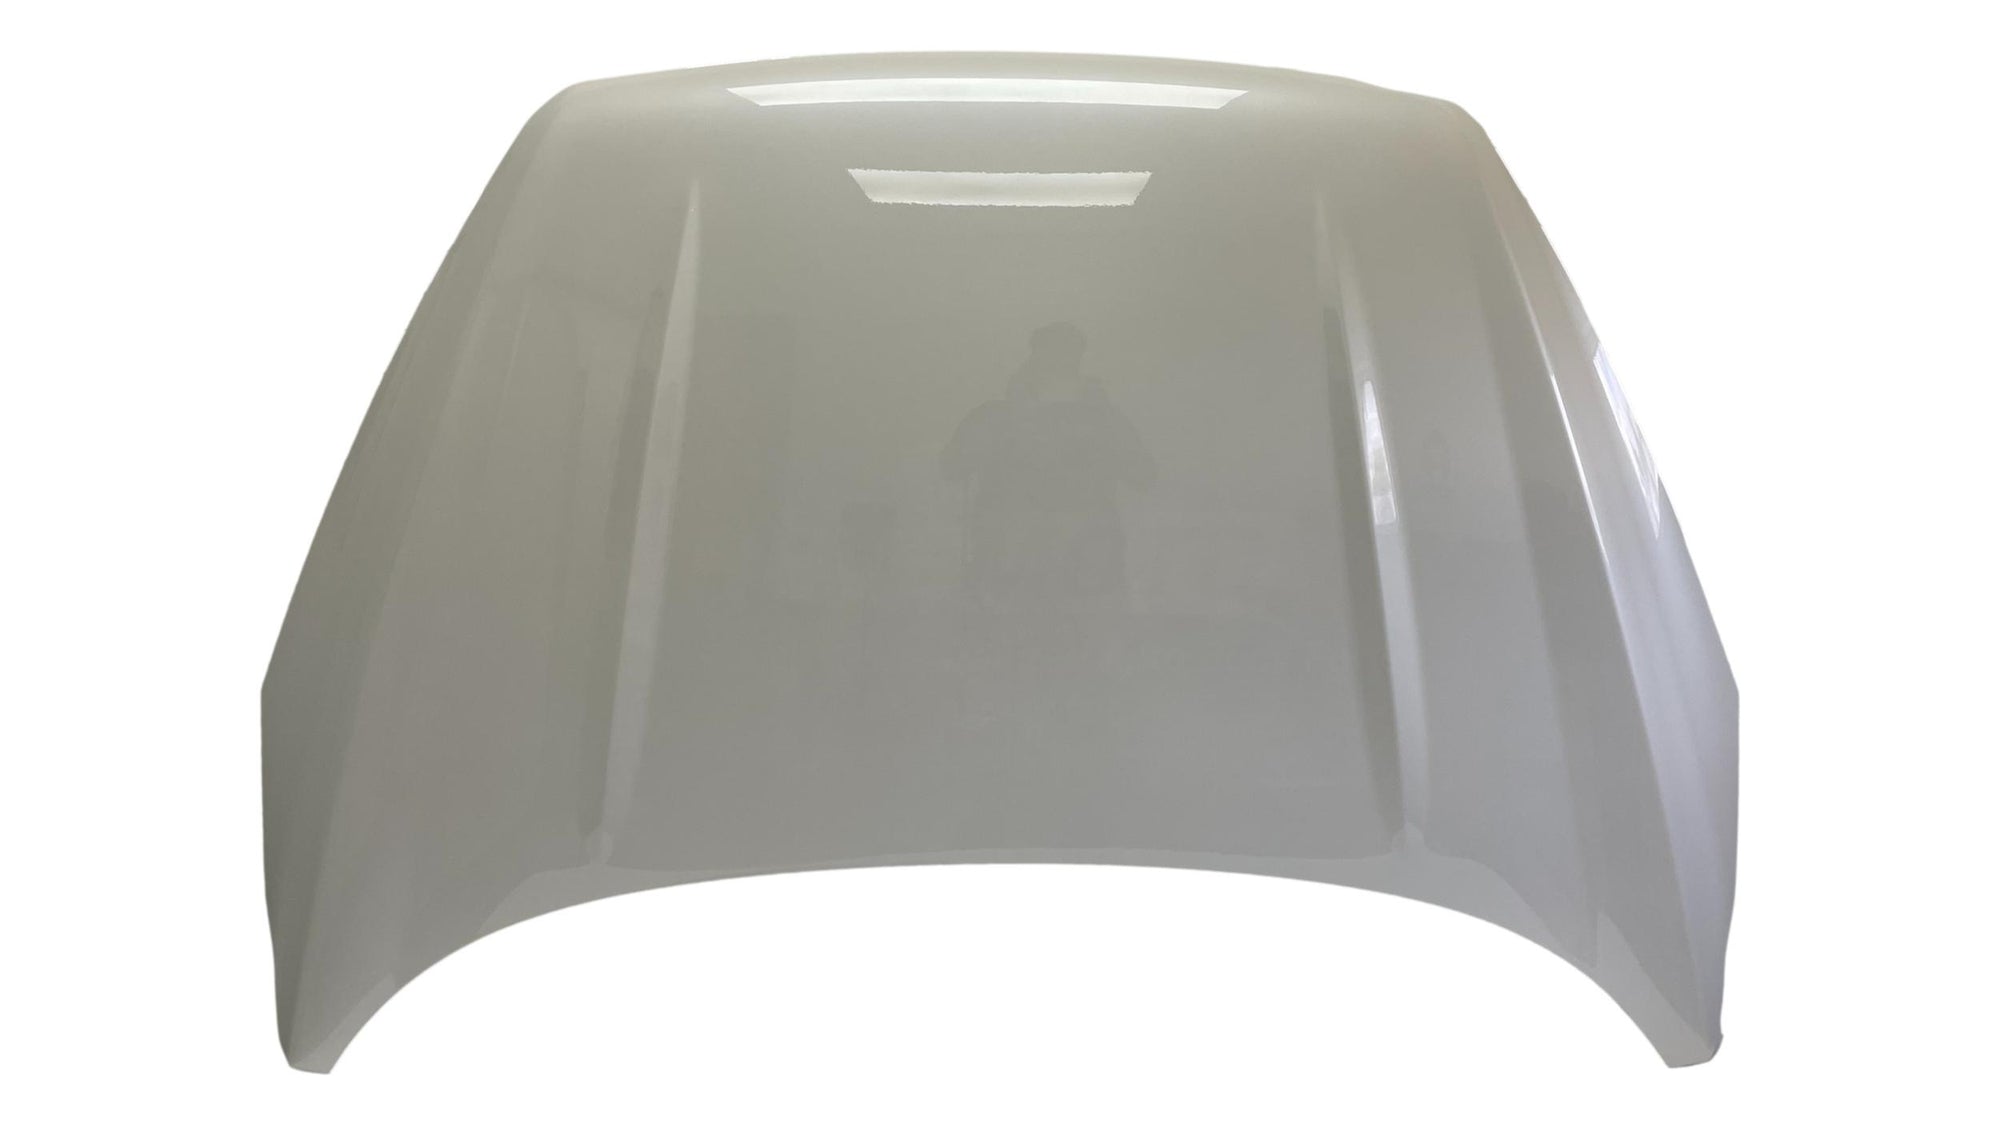 24999 - 2017 Ford Escape Hood Painted White Platinum Pearl (UG) GJ5Z16612A FO123031824999 - 2017 Ford Escape Hood Painted White Platinum Pearl (UG) GJ5Z16612A FO1230318